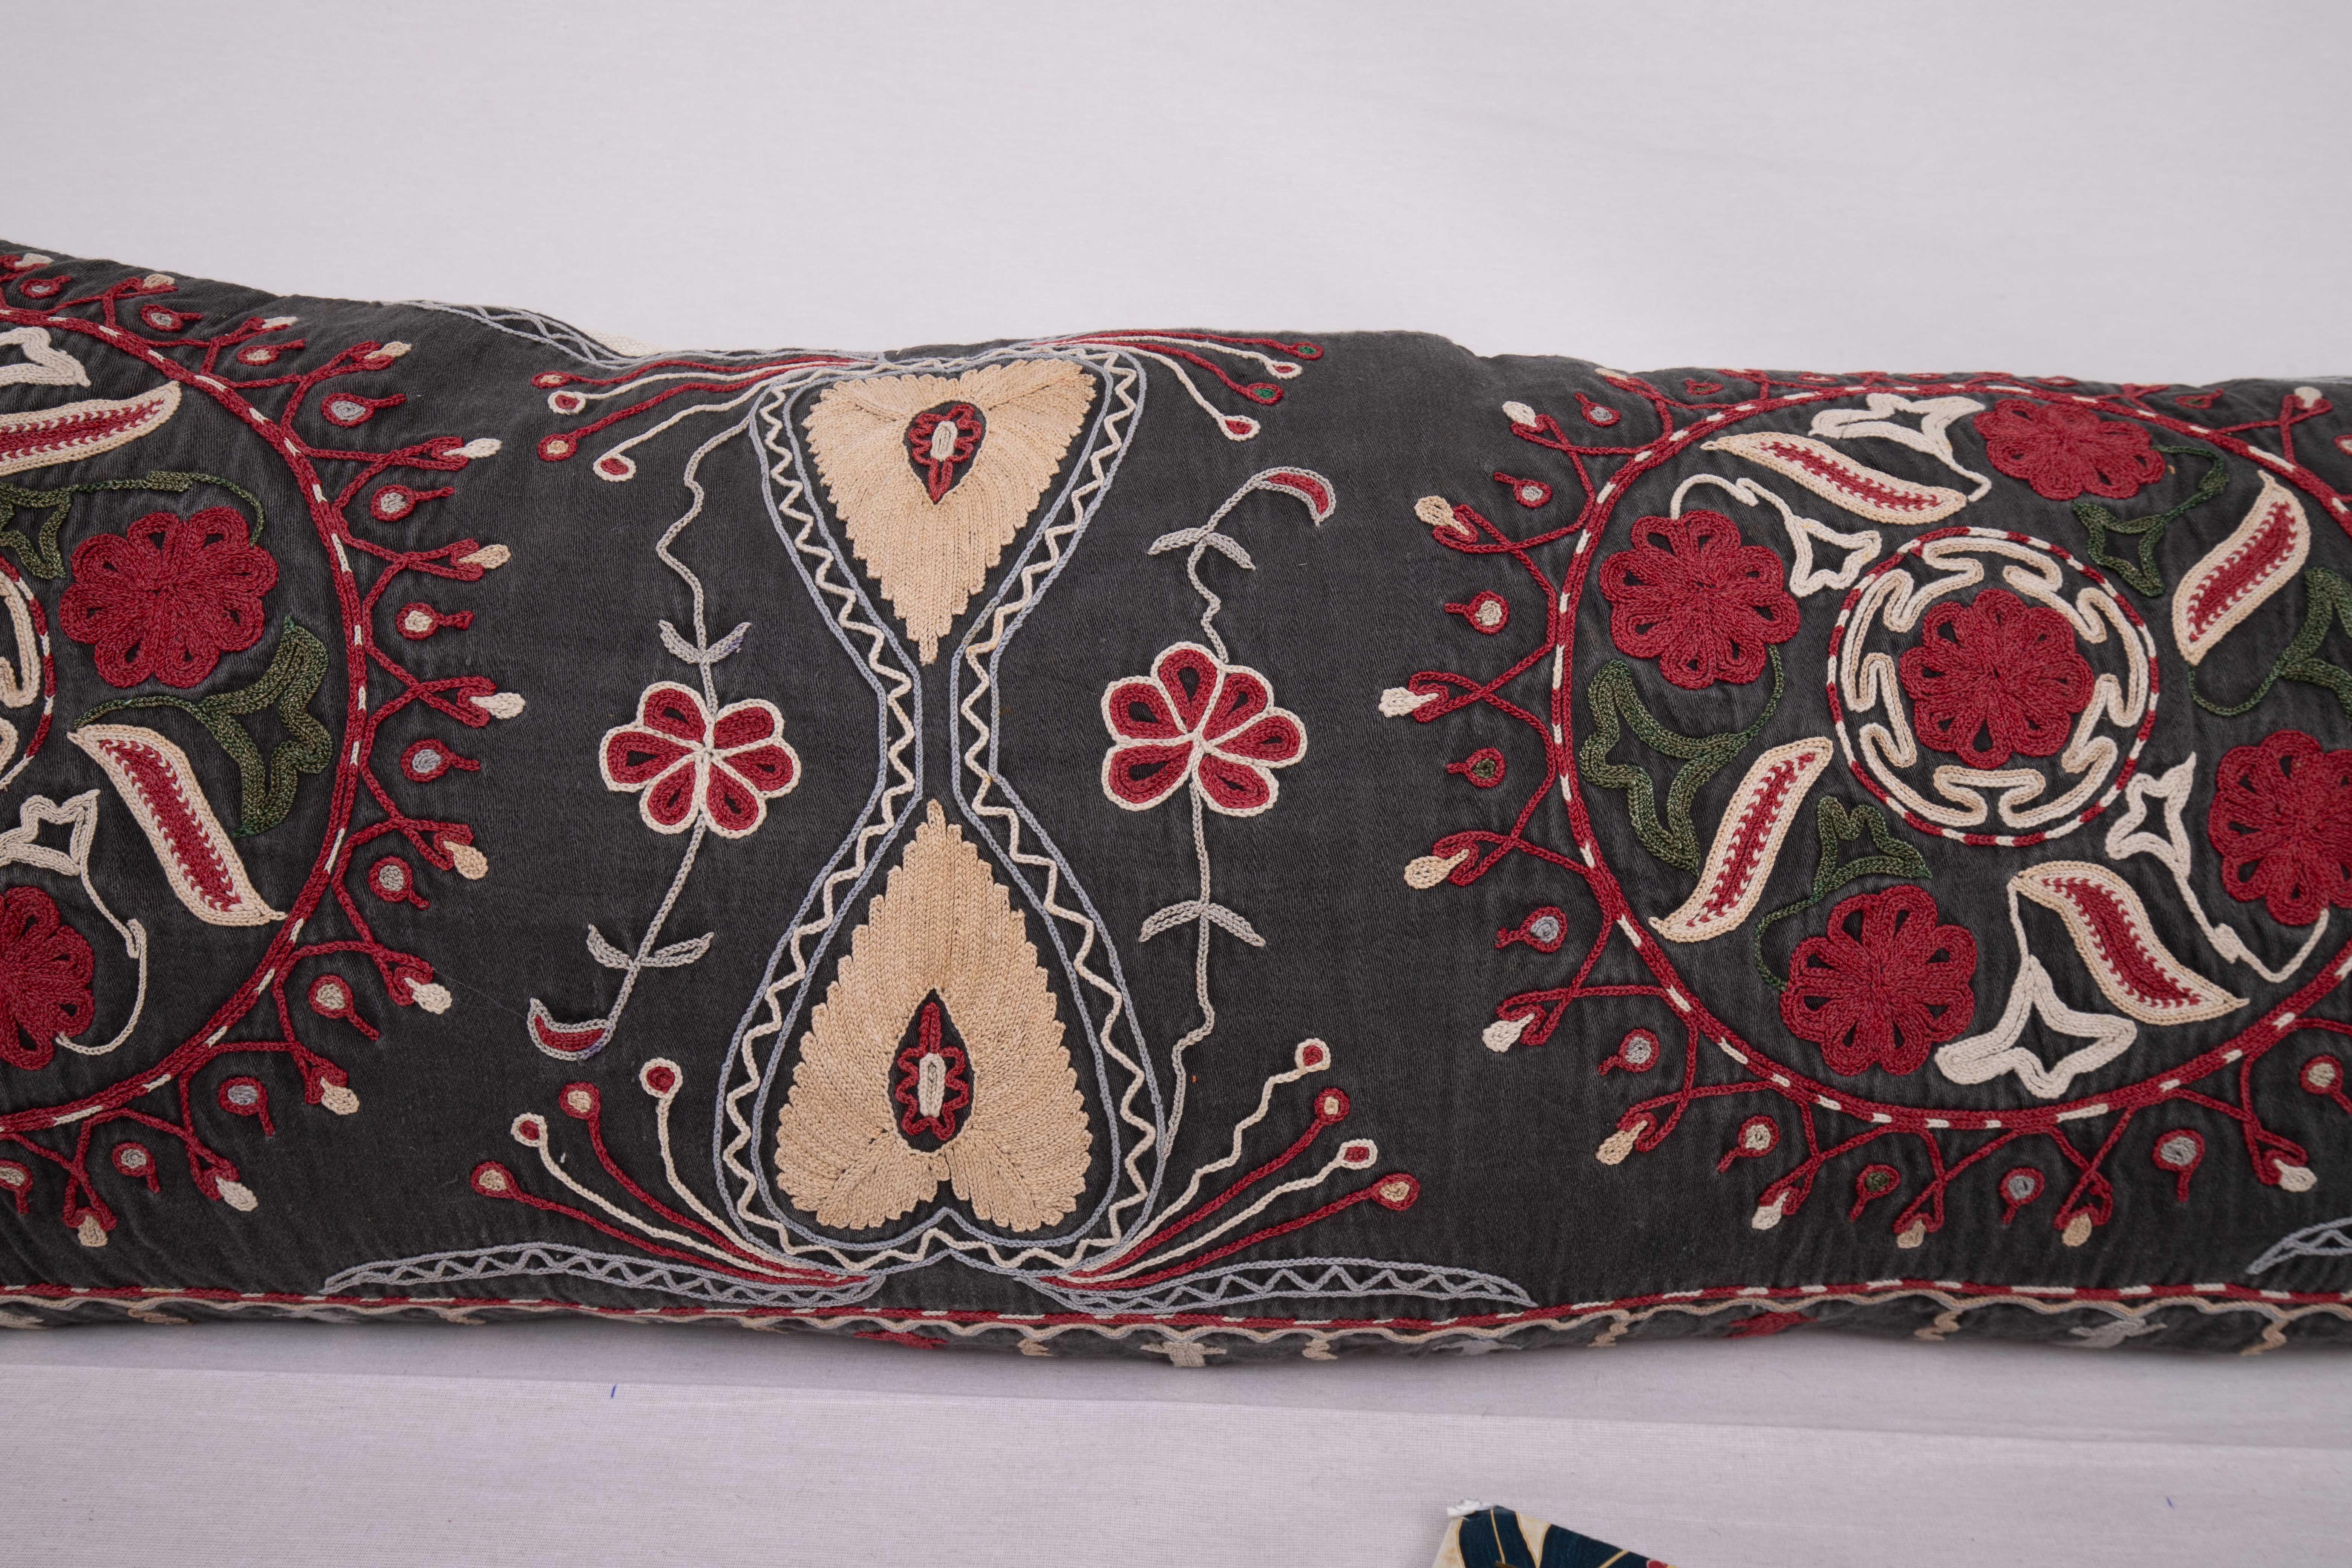 Embroidered Lumbar Pillowcase Made from a Mid-20th C, Kazak / Kyrgyz Embroidery